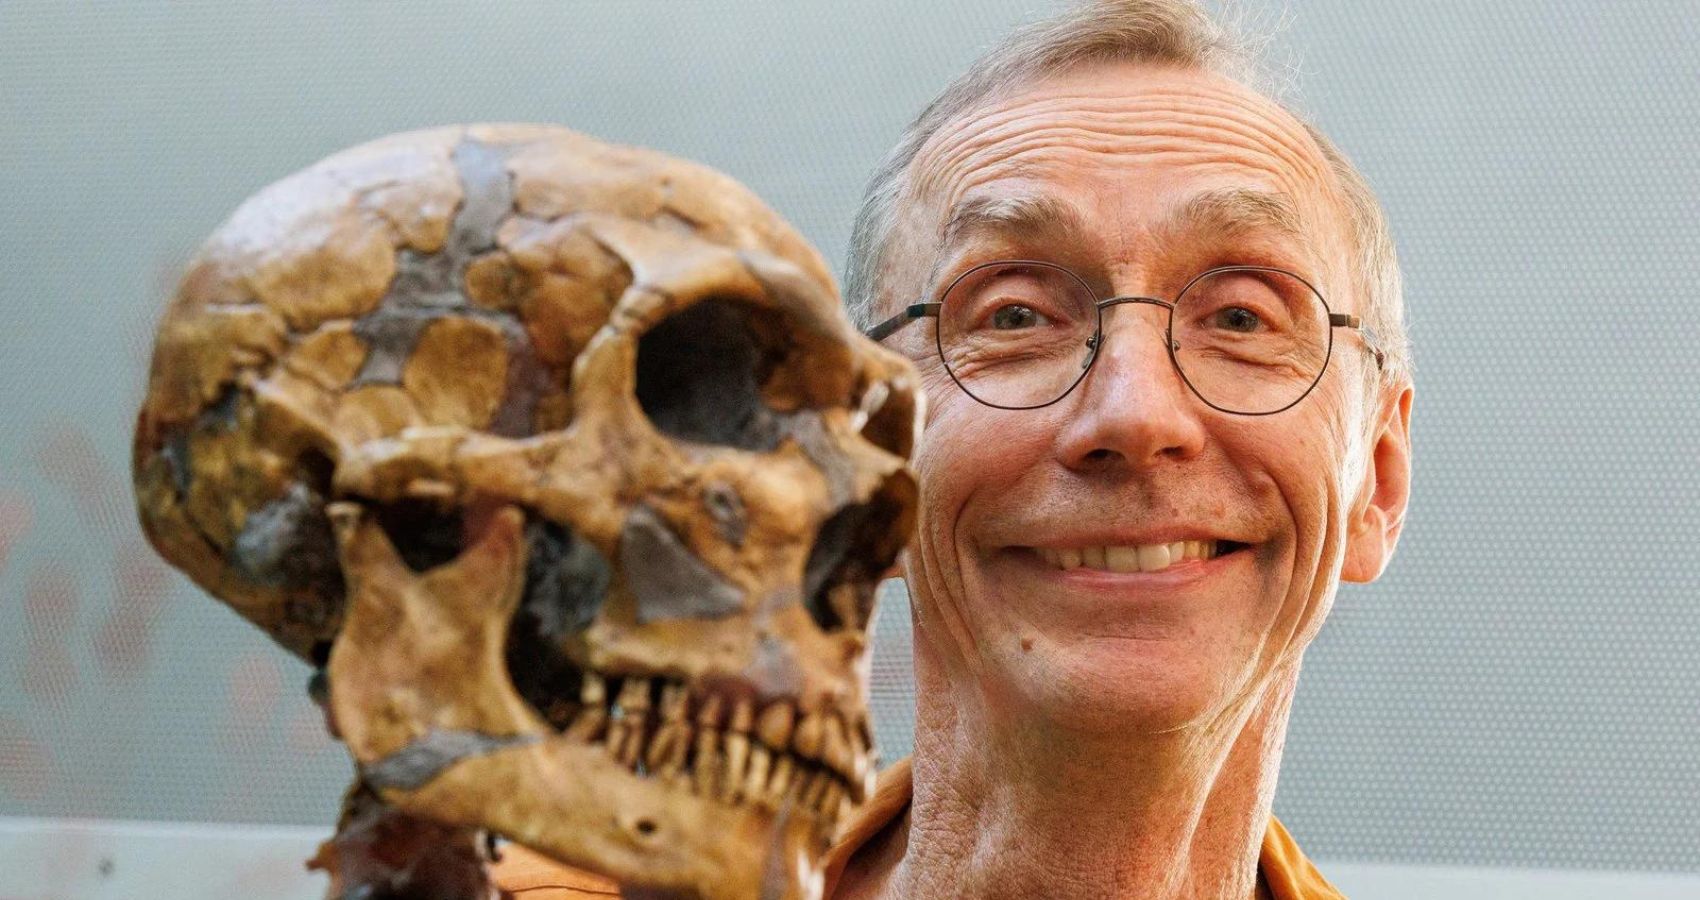 Svante Paabo Chosen For Nobel Prize In Physics For His Neanderthal Work